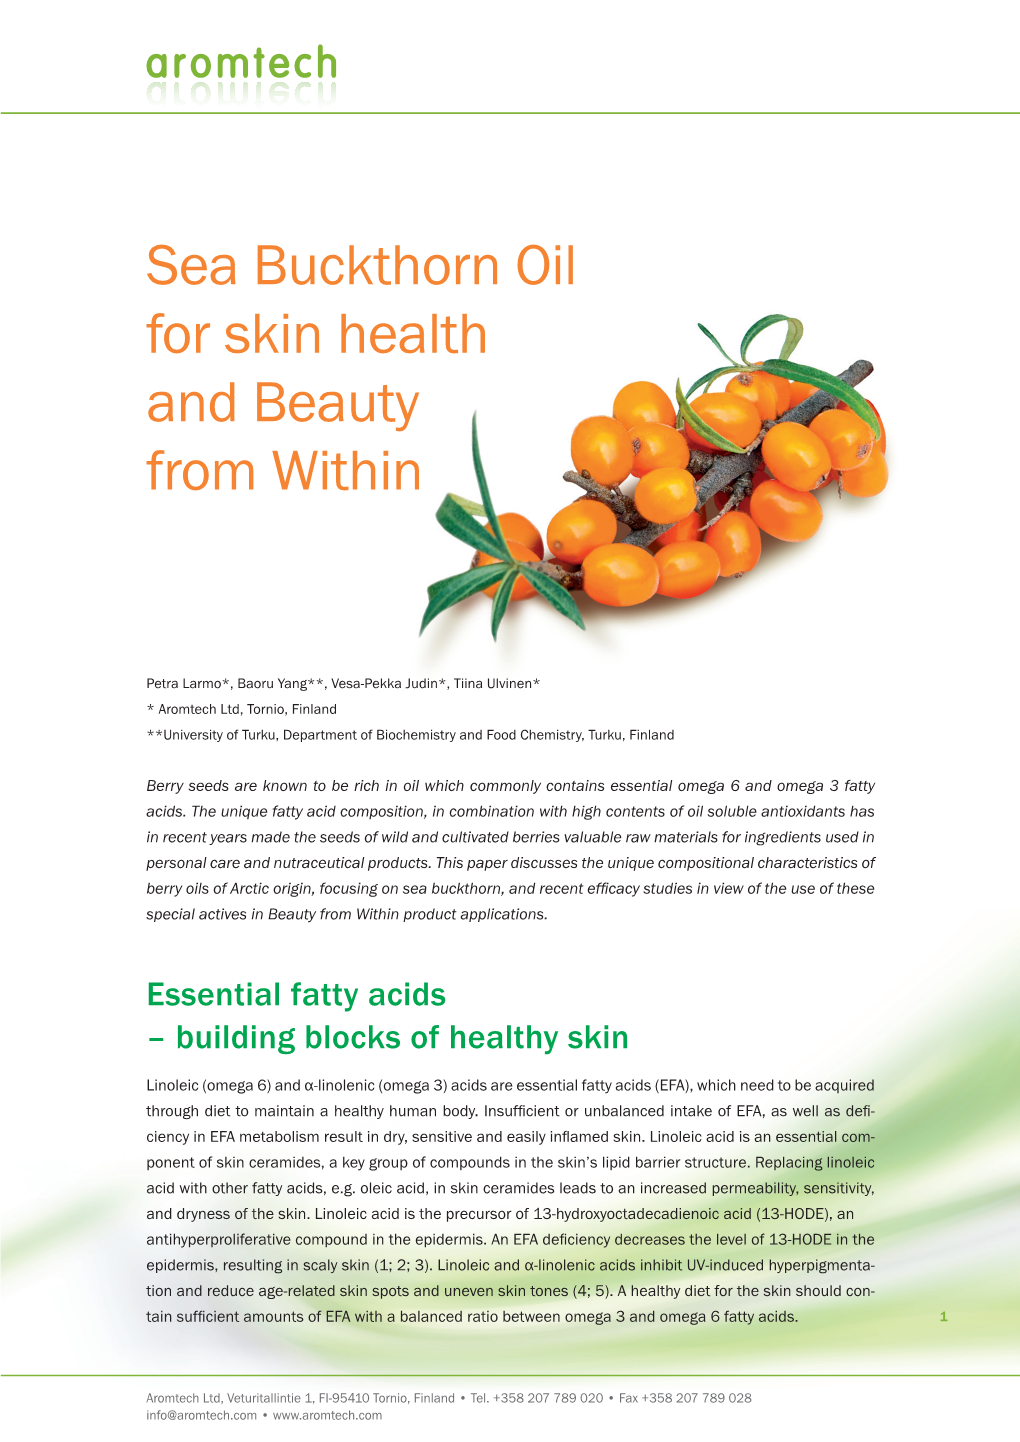 Sea Buckthorn Oil for Skin Health and Beauty from Within